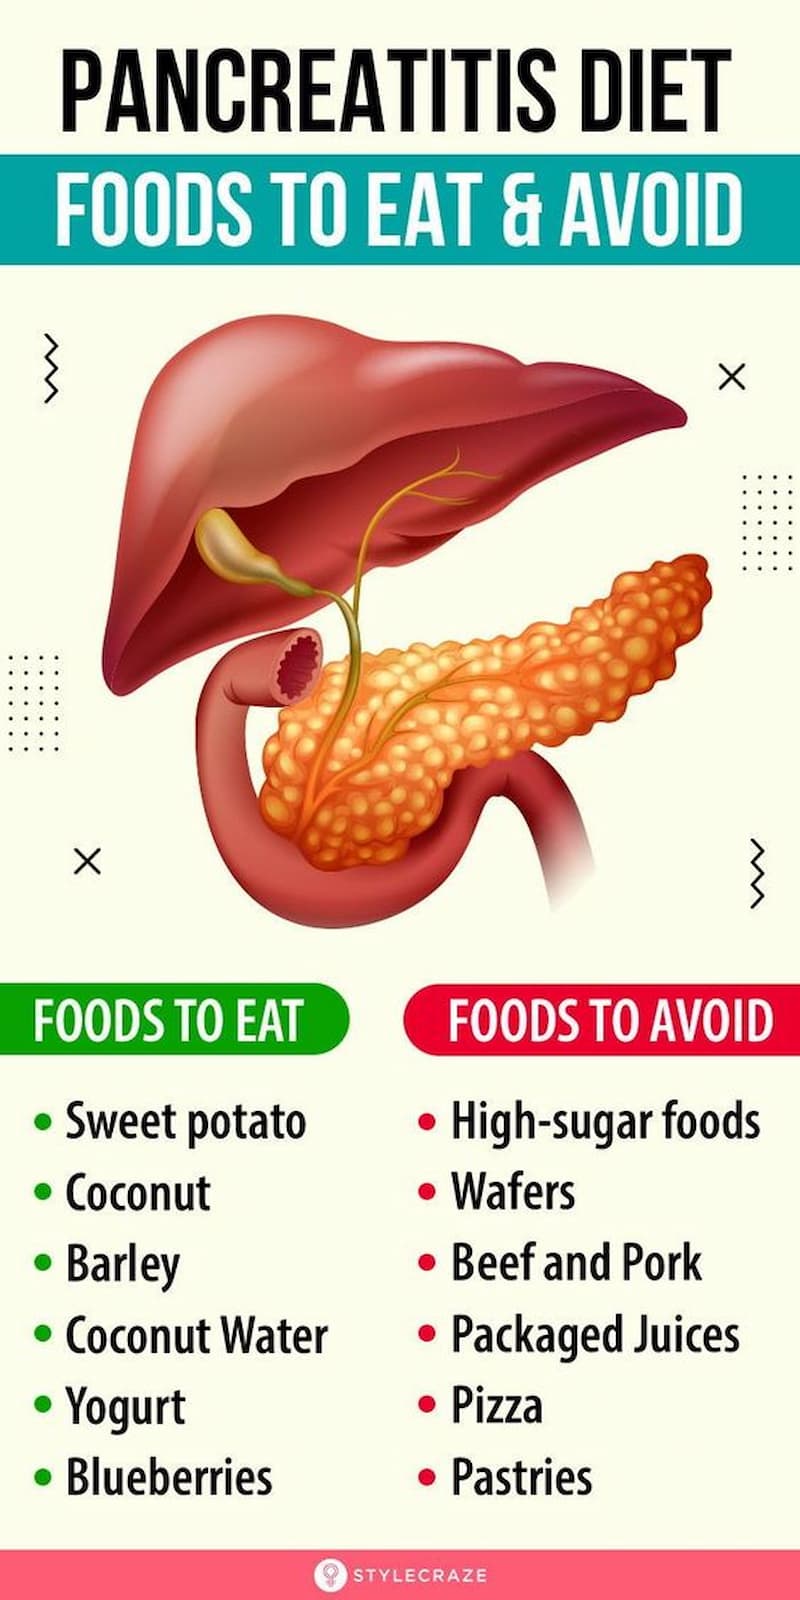 Foods to eat and avoid when you have pancreatitis